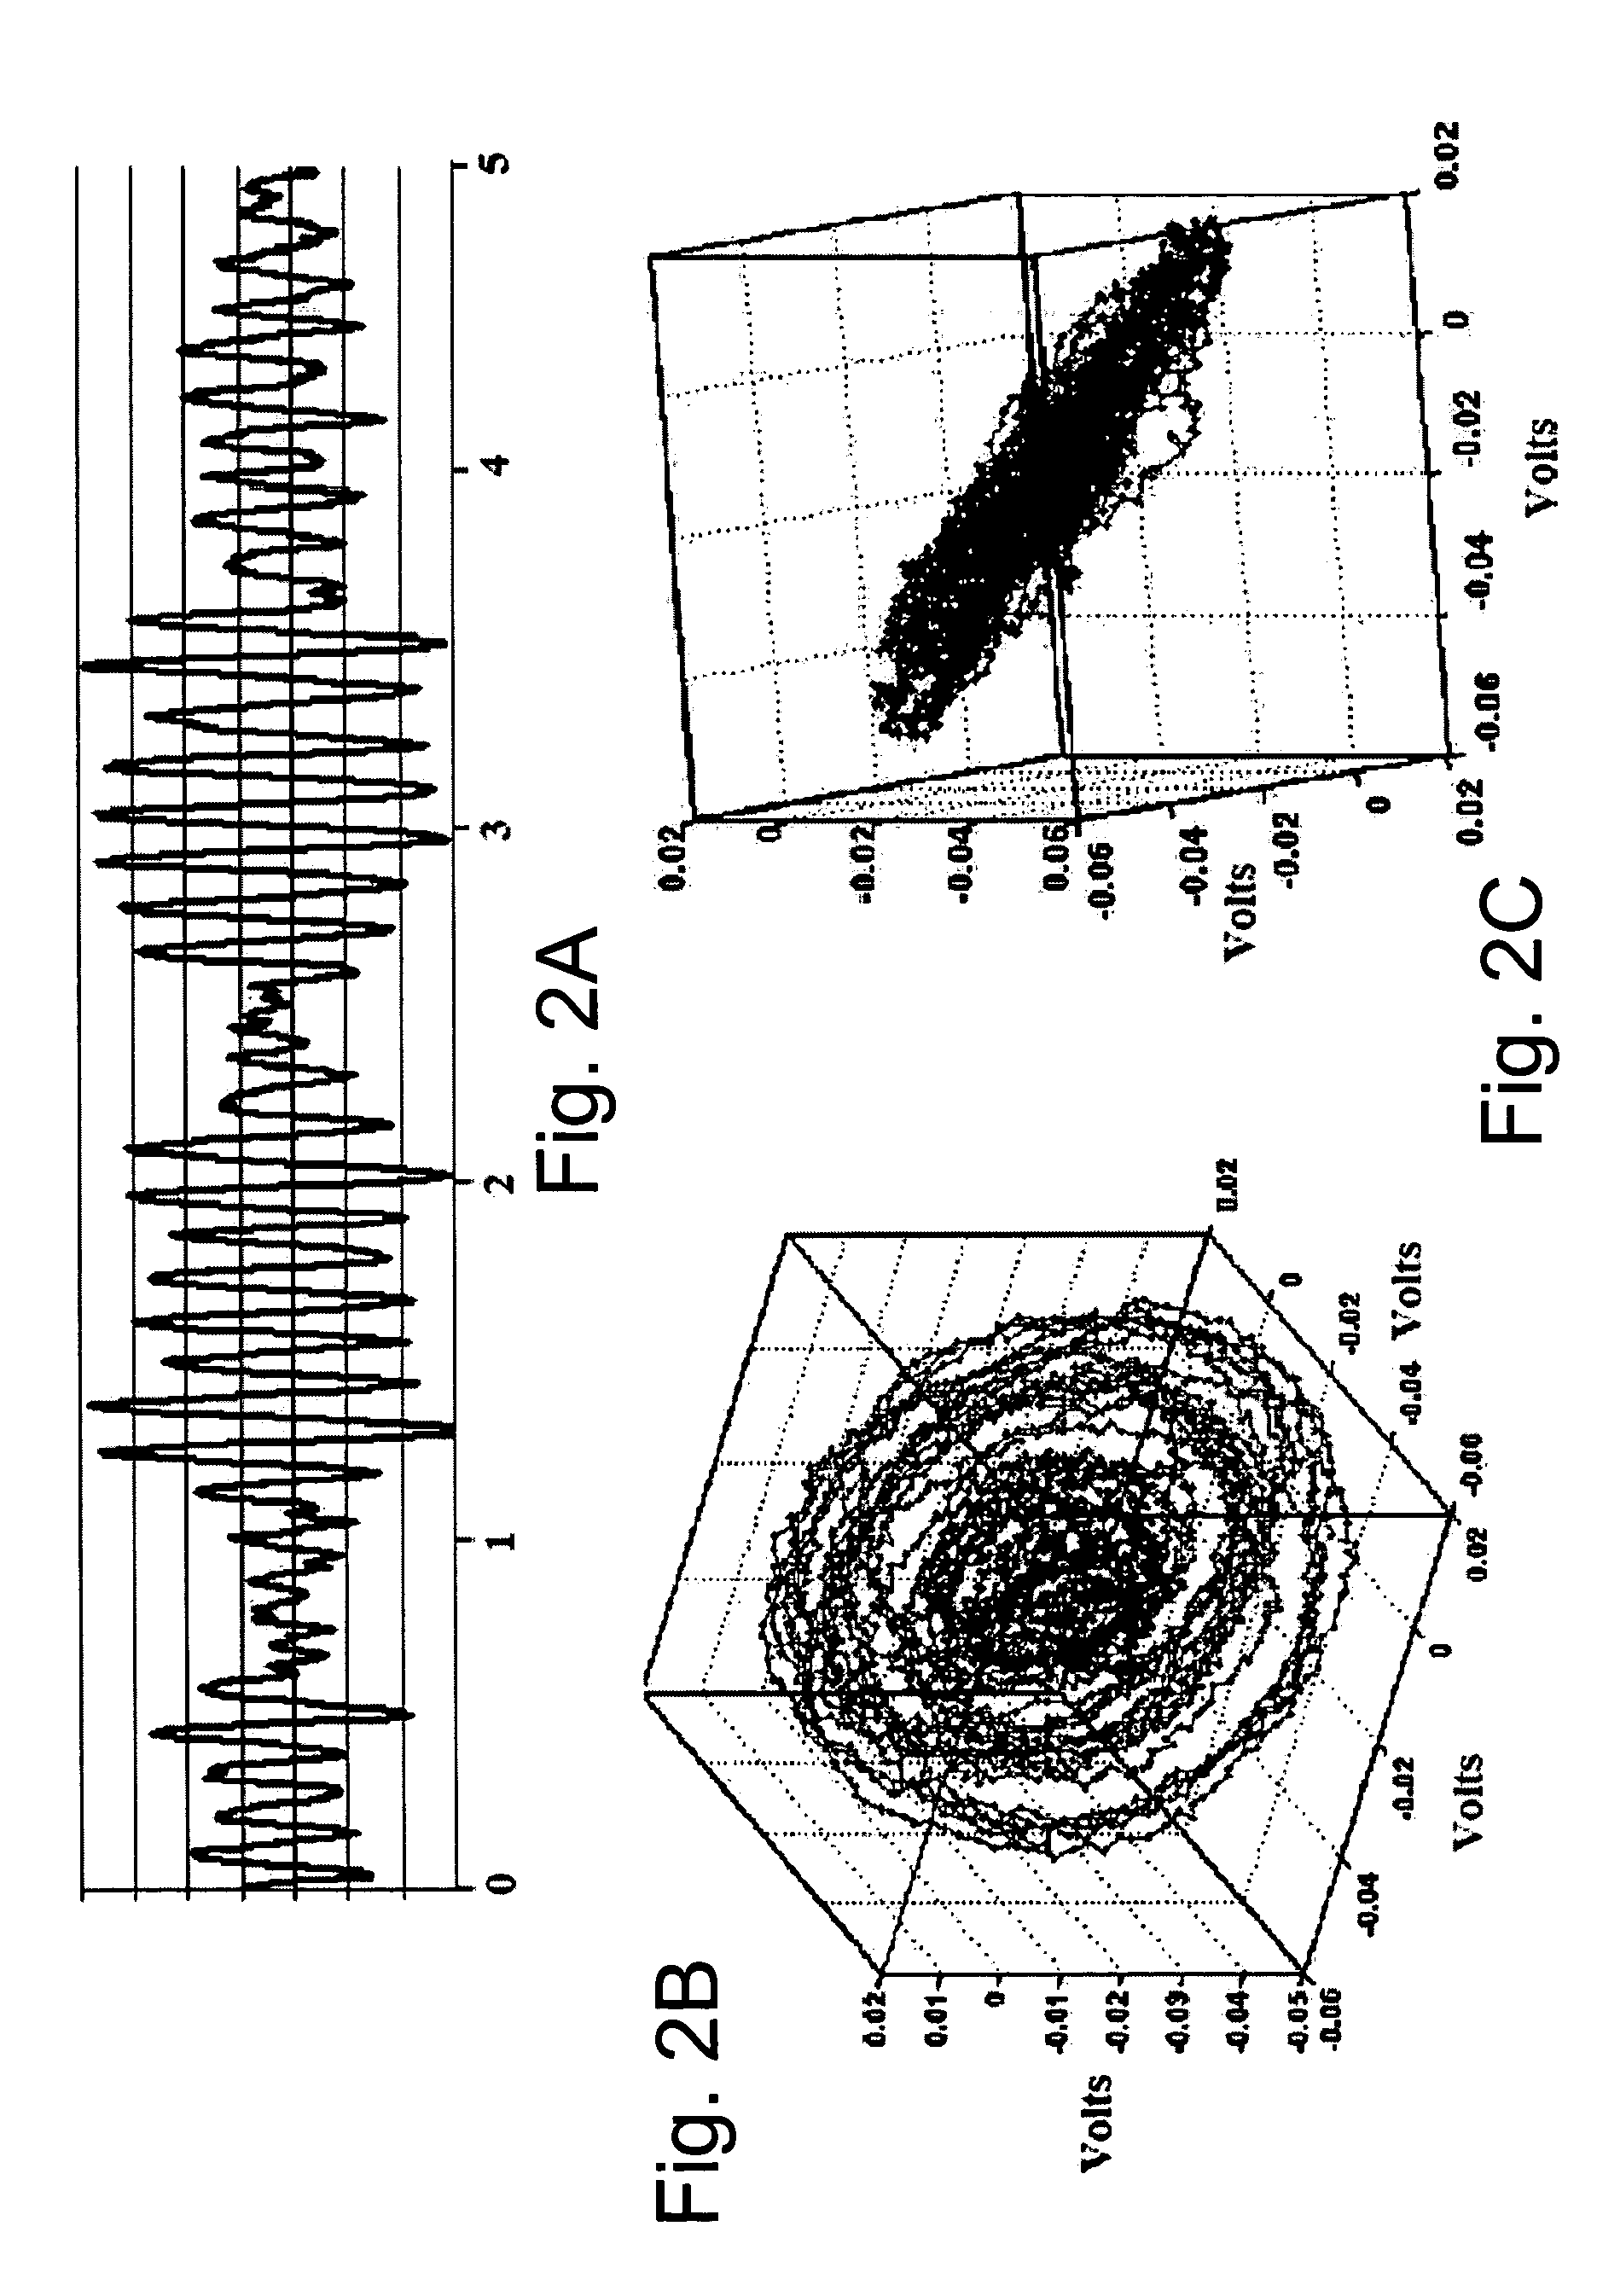 Devices, systems and methods for characterization of ventricular fibrillation and for treatment of ventricular fibrillation